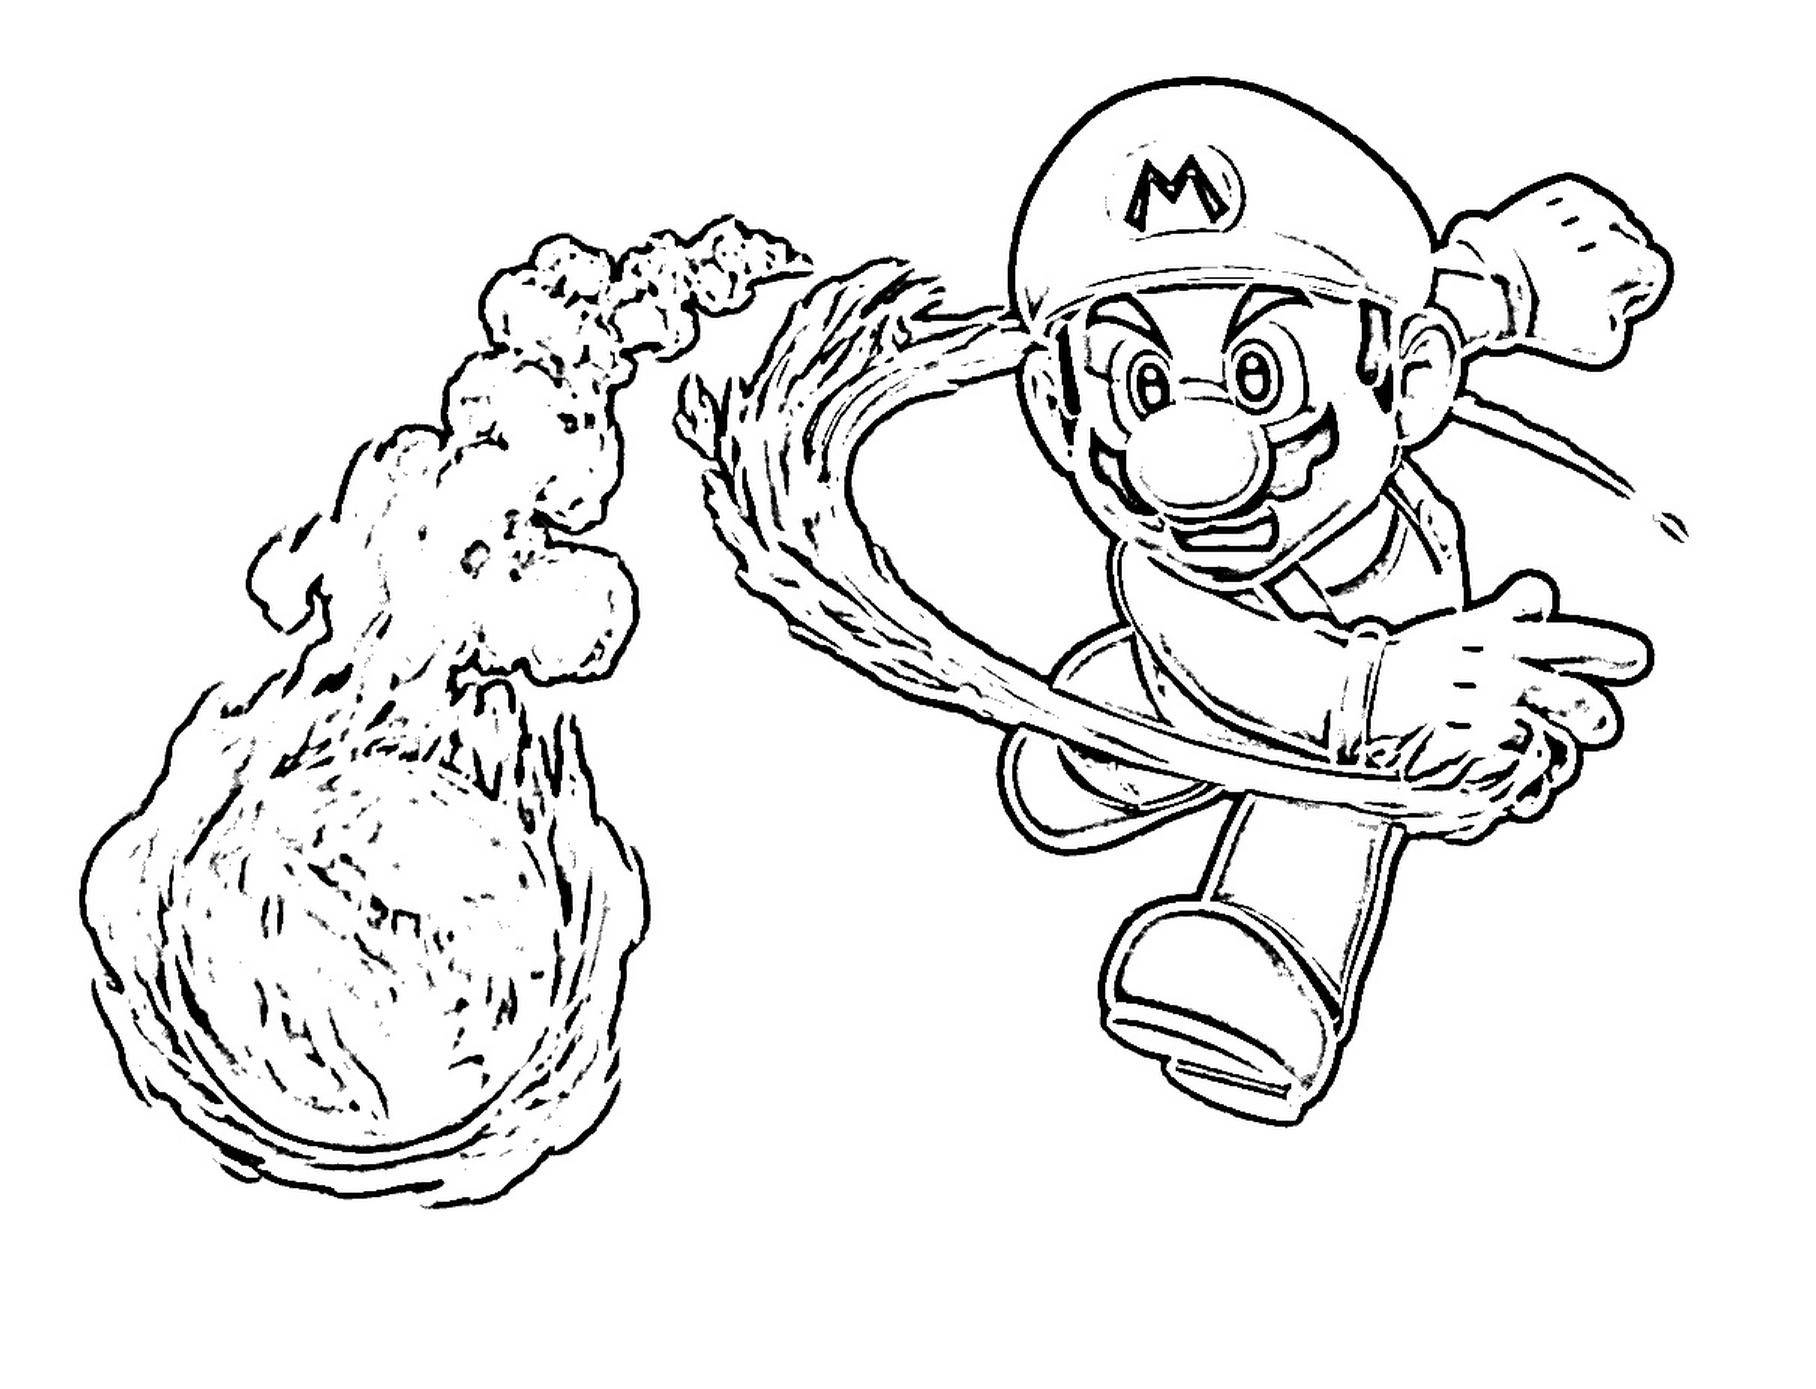 Coloring Mario in the game. Category games. Tags:  games, Mario.